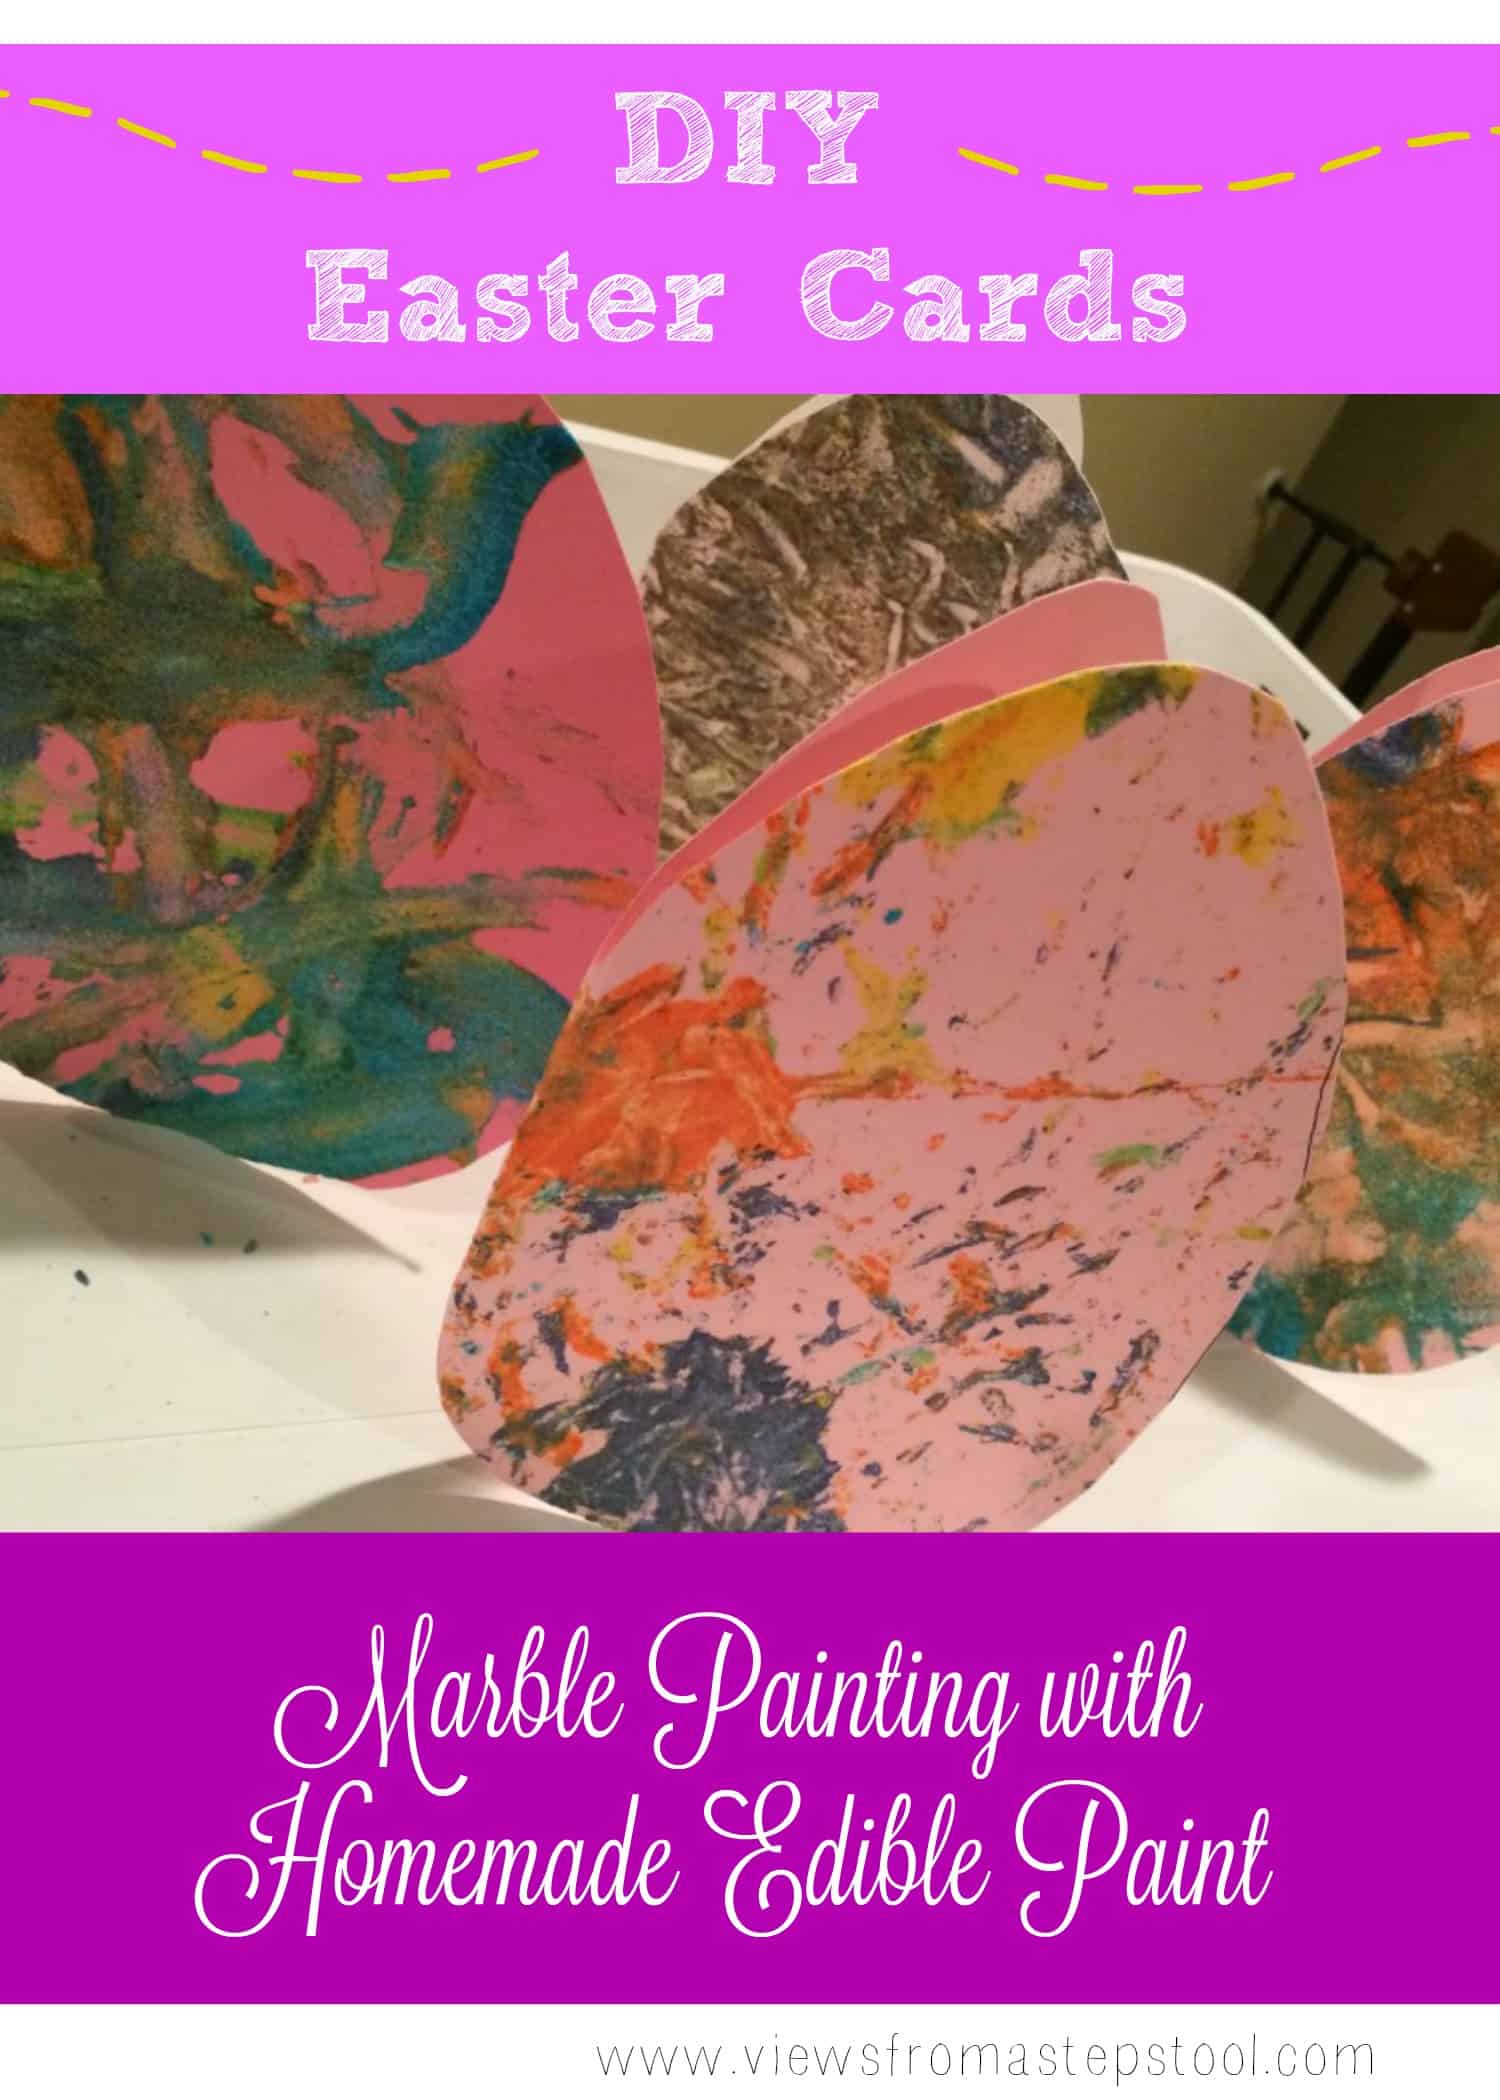 Check out how we made these DIY Easter cards baby friendly with homemade, edible paint!